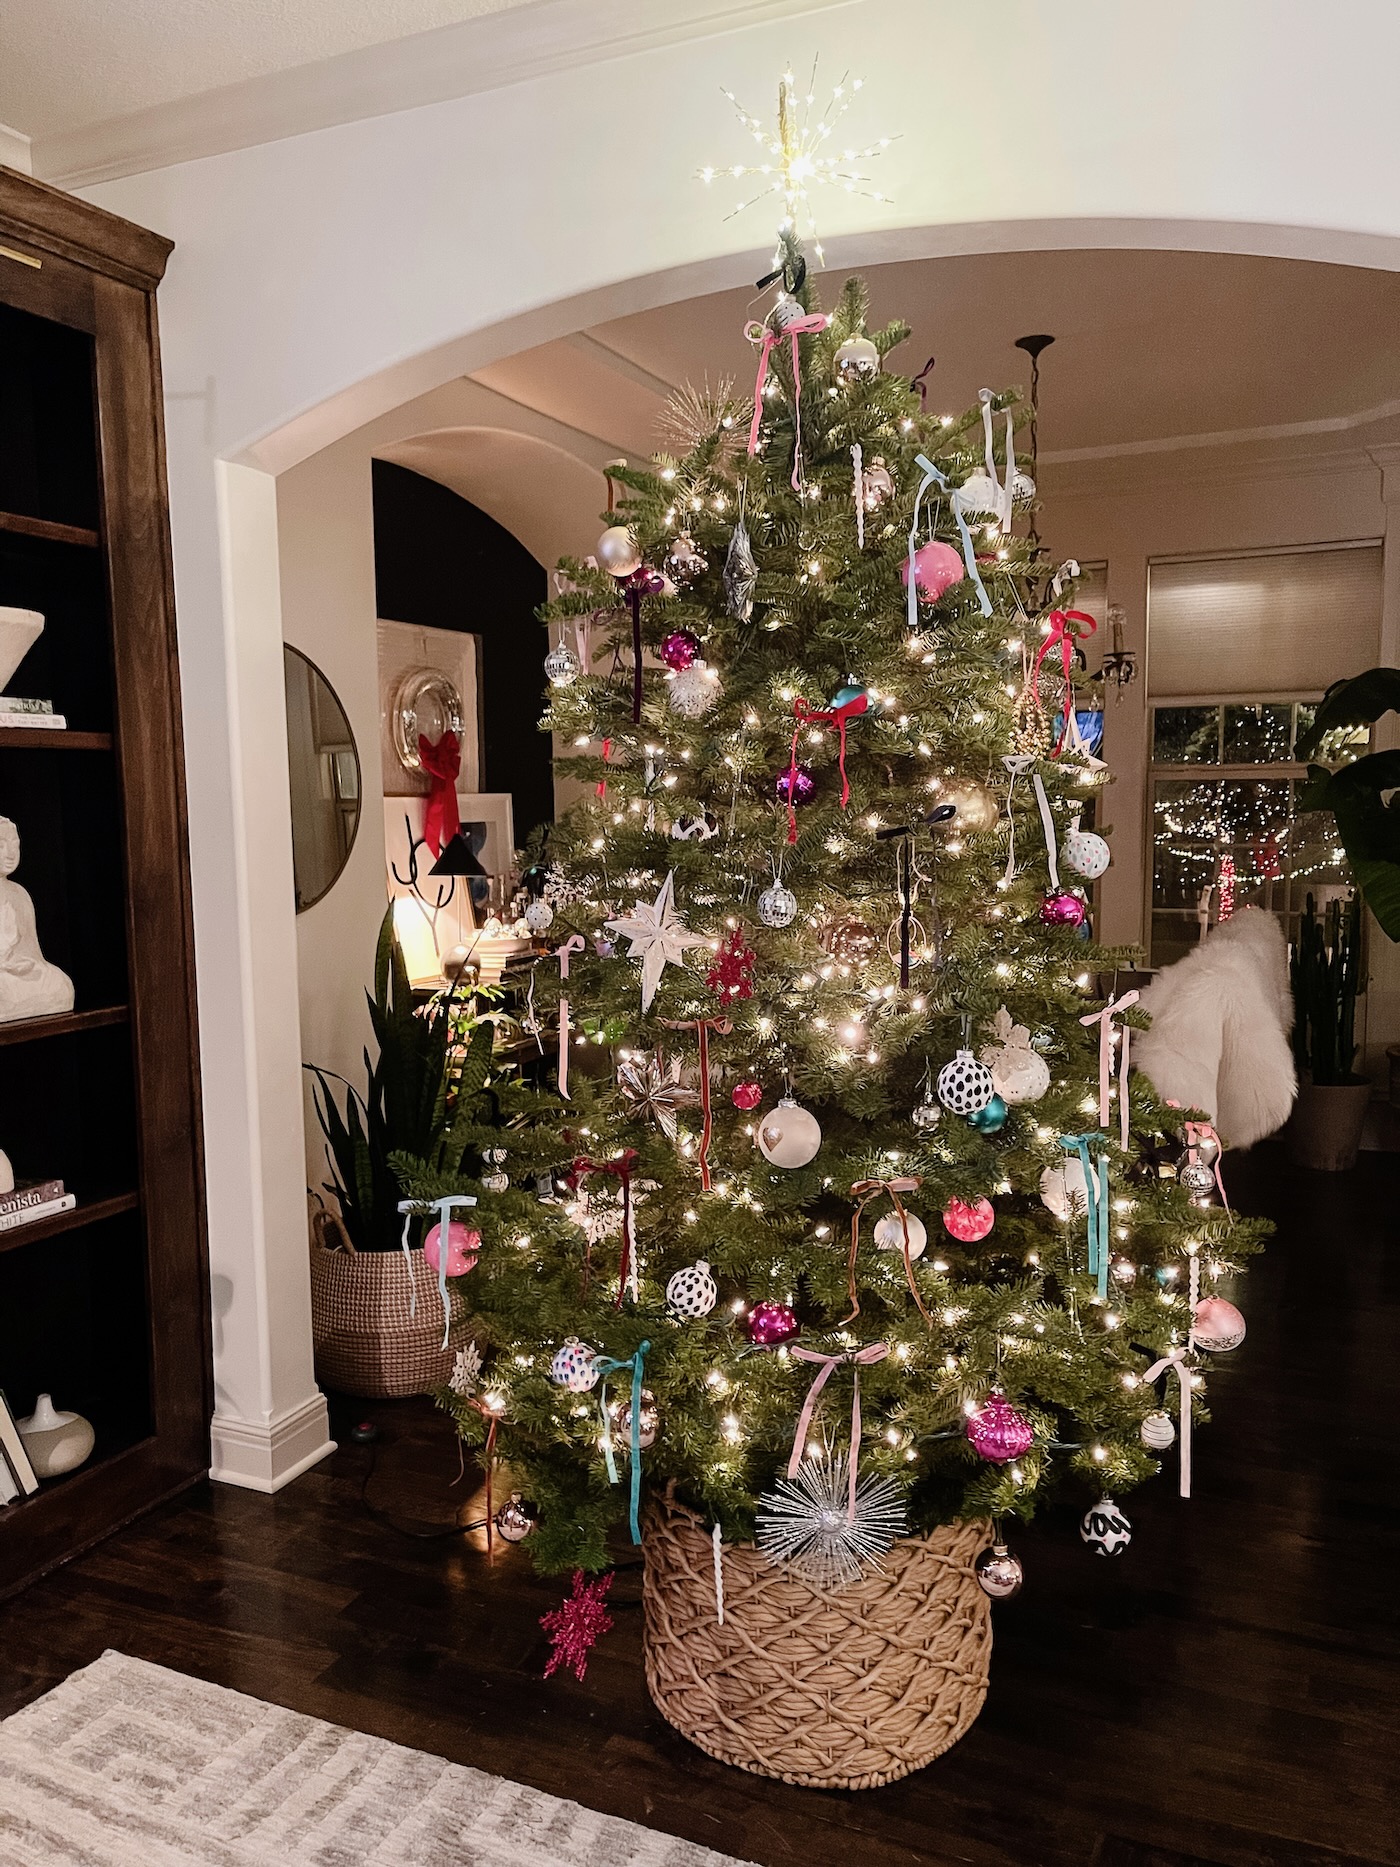 How to Add Velvet Ribbon Bows to a Christmas Tree - Life Love Larson